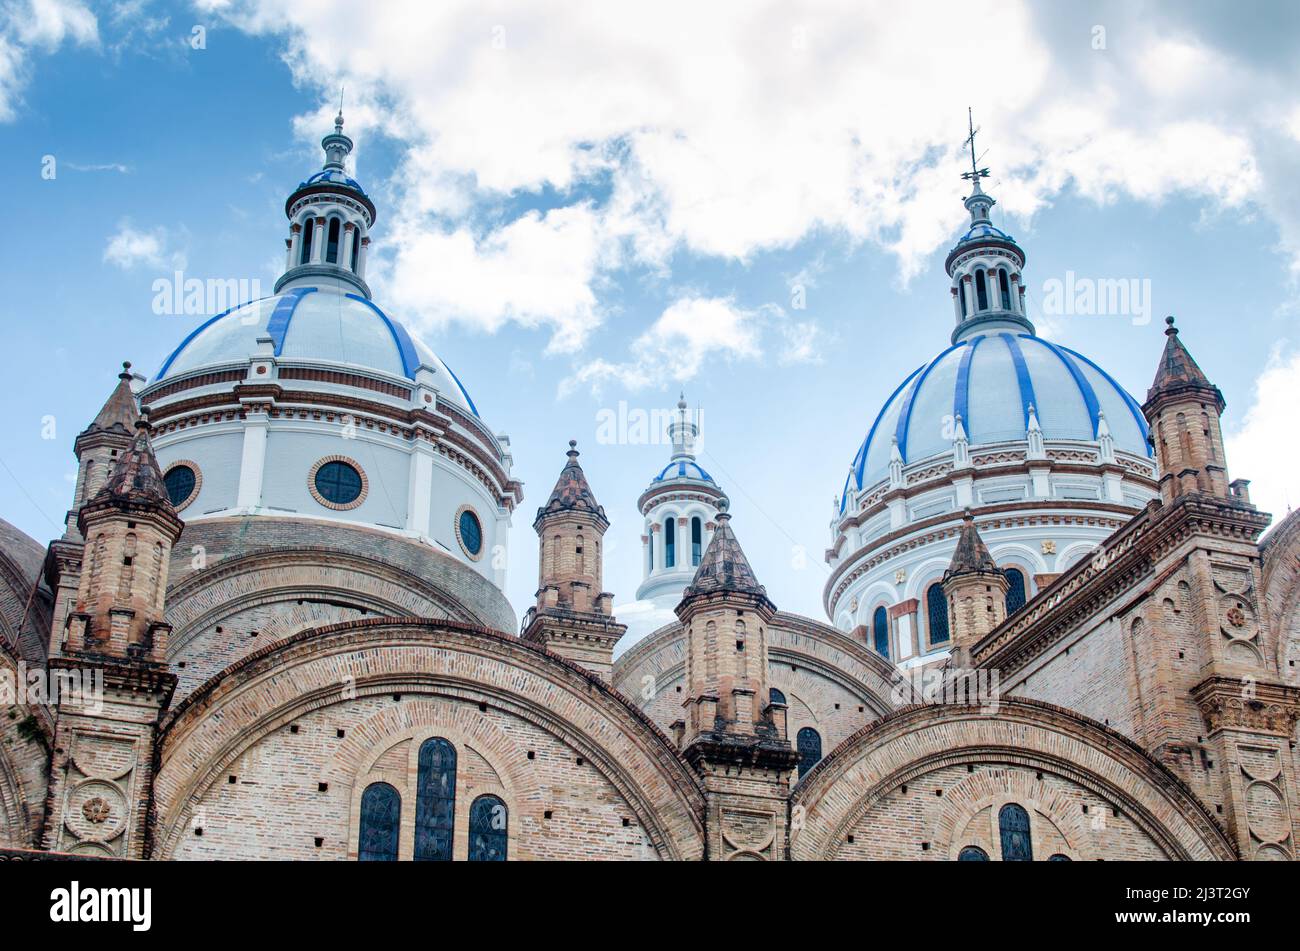 Domes of the Cathedral of the Immaculate Conception or New Cathedral of Cuenca Stock Photo